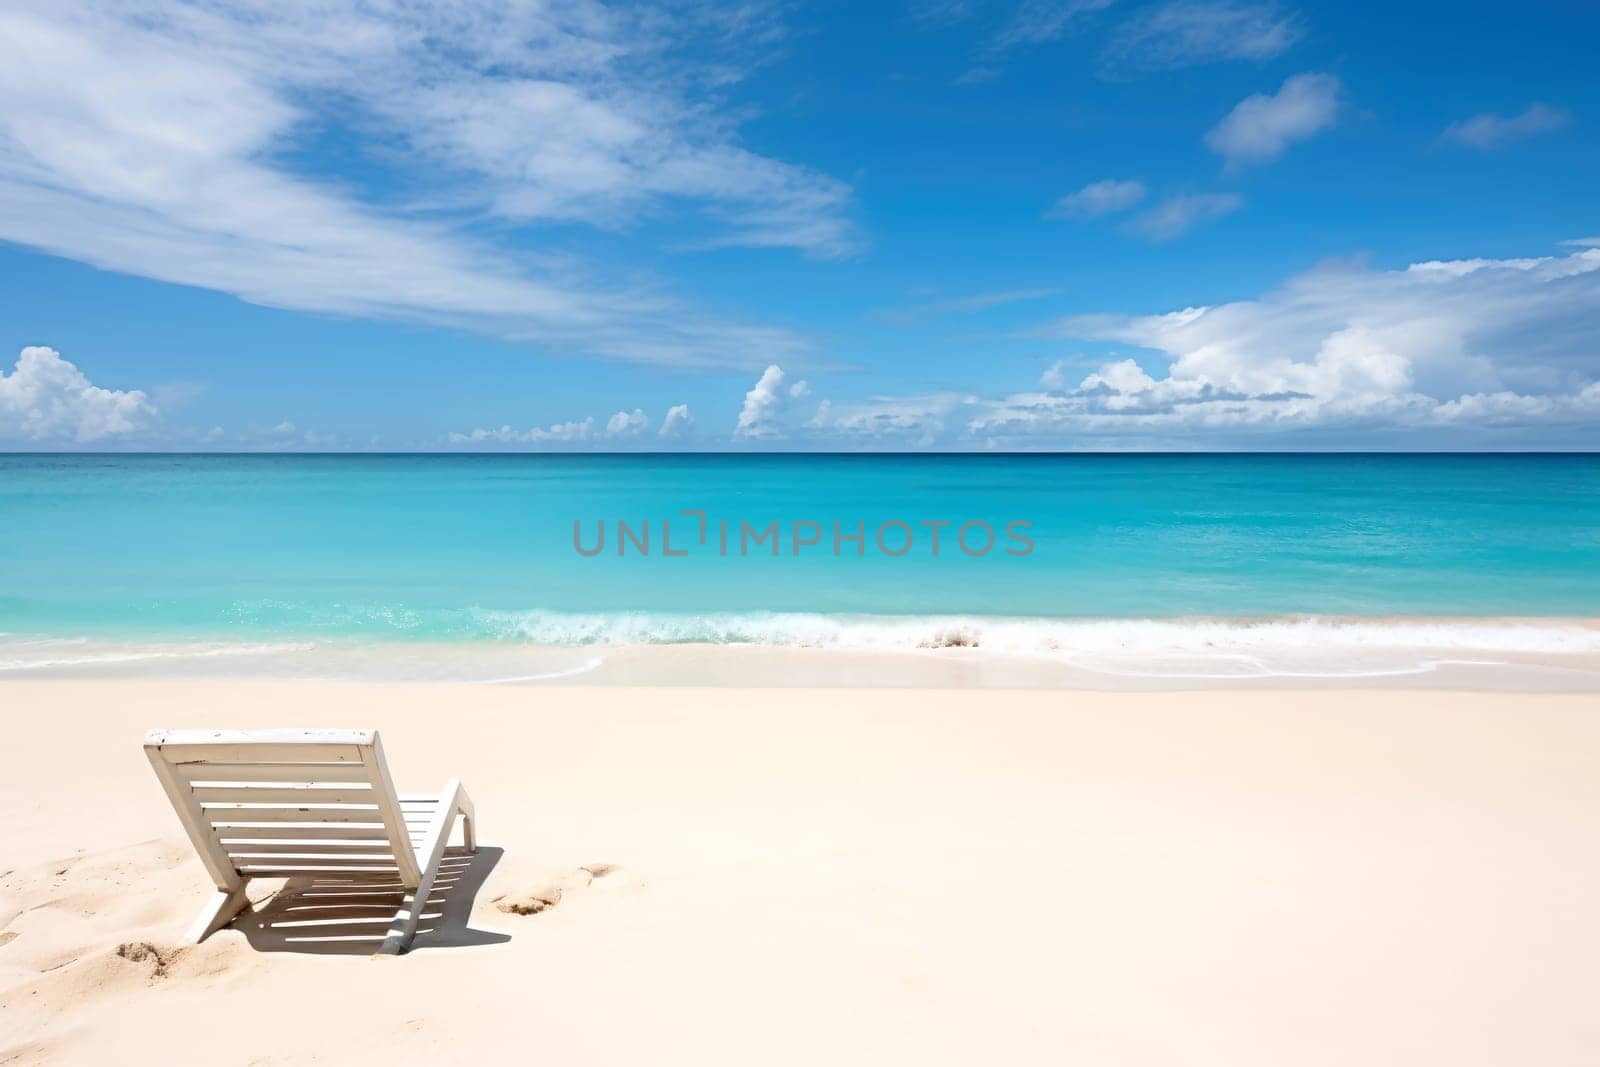 Tranquil beach scene with a single chair facing the serene turquoise ocean